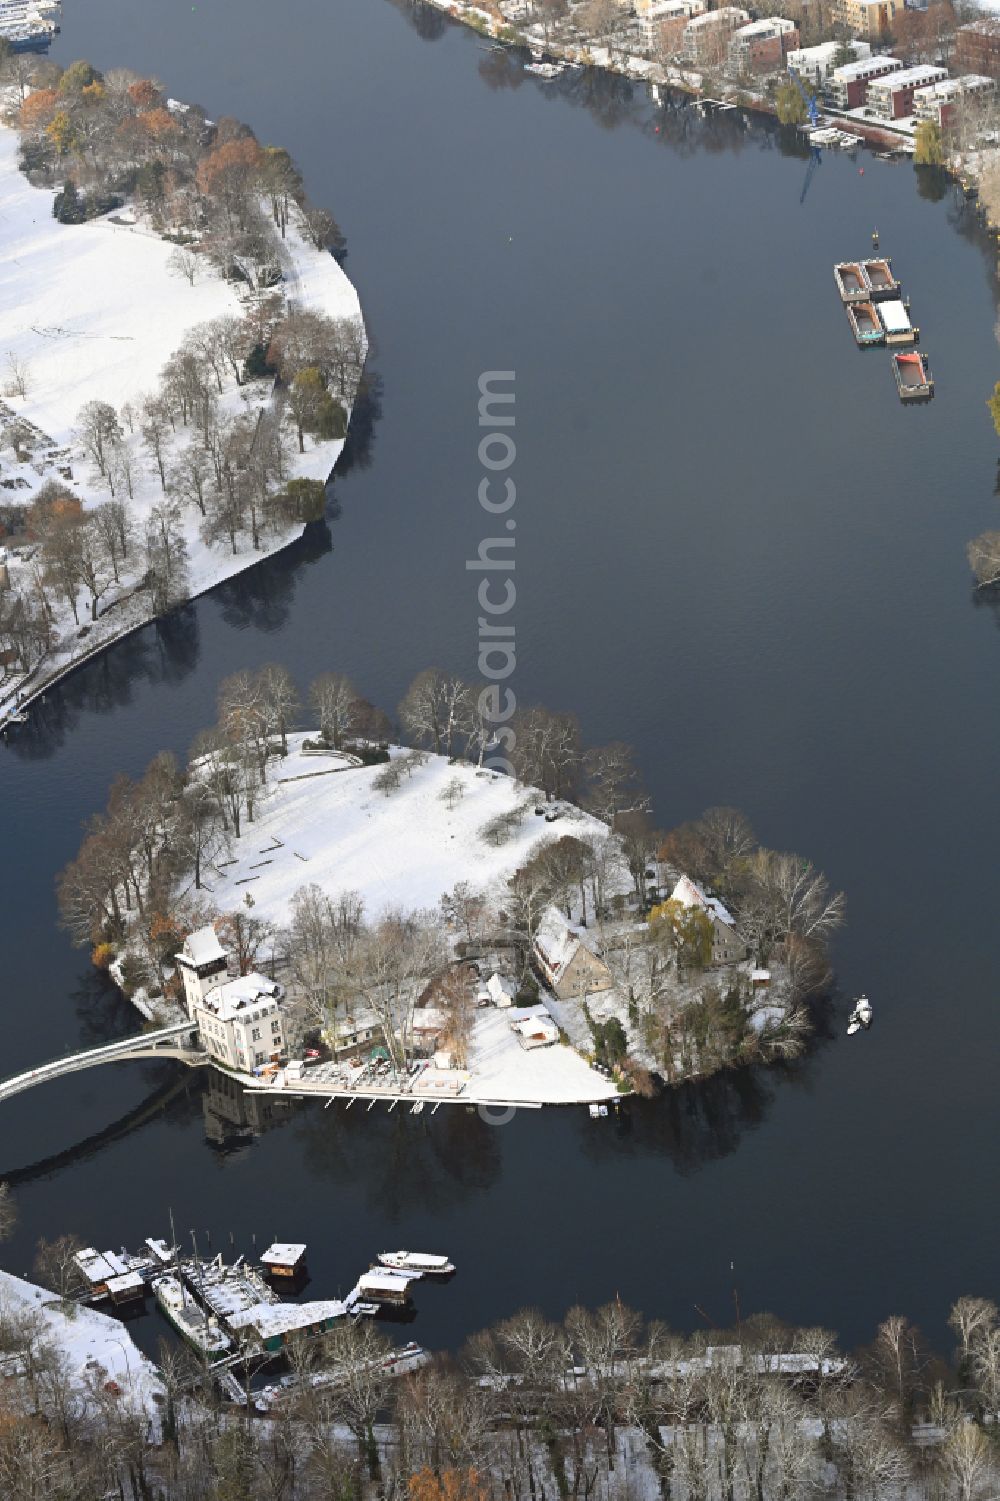 Berlin from above - Wintry snowy island on the banks of the river course of Spree River in the district Treptow in Berlin, Germany